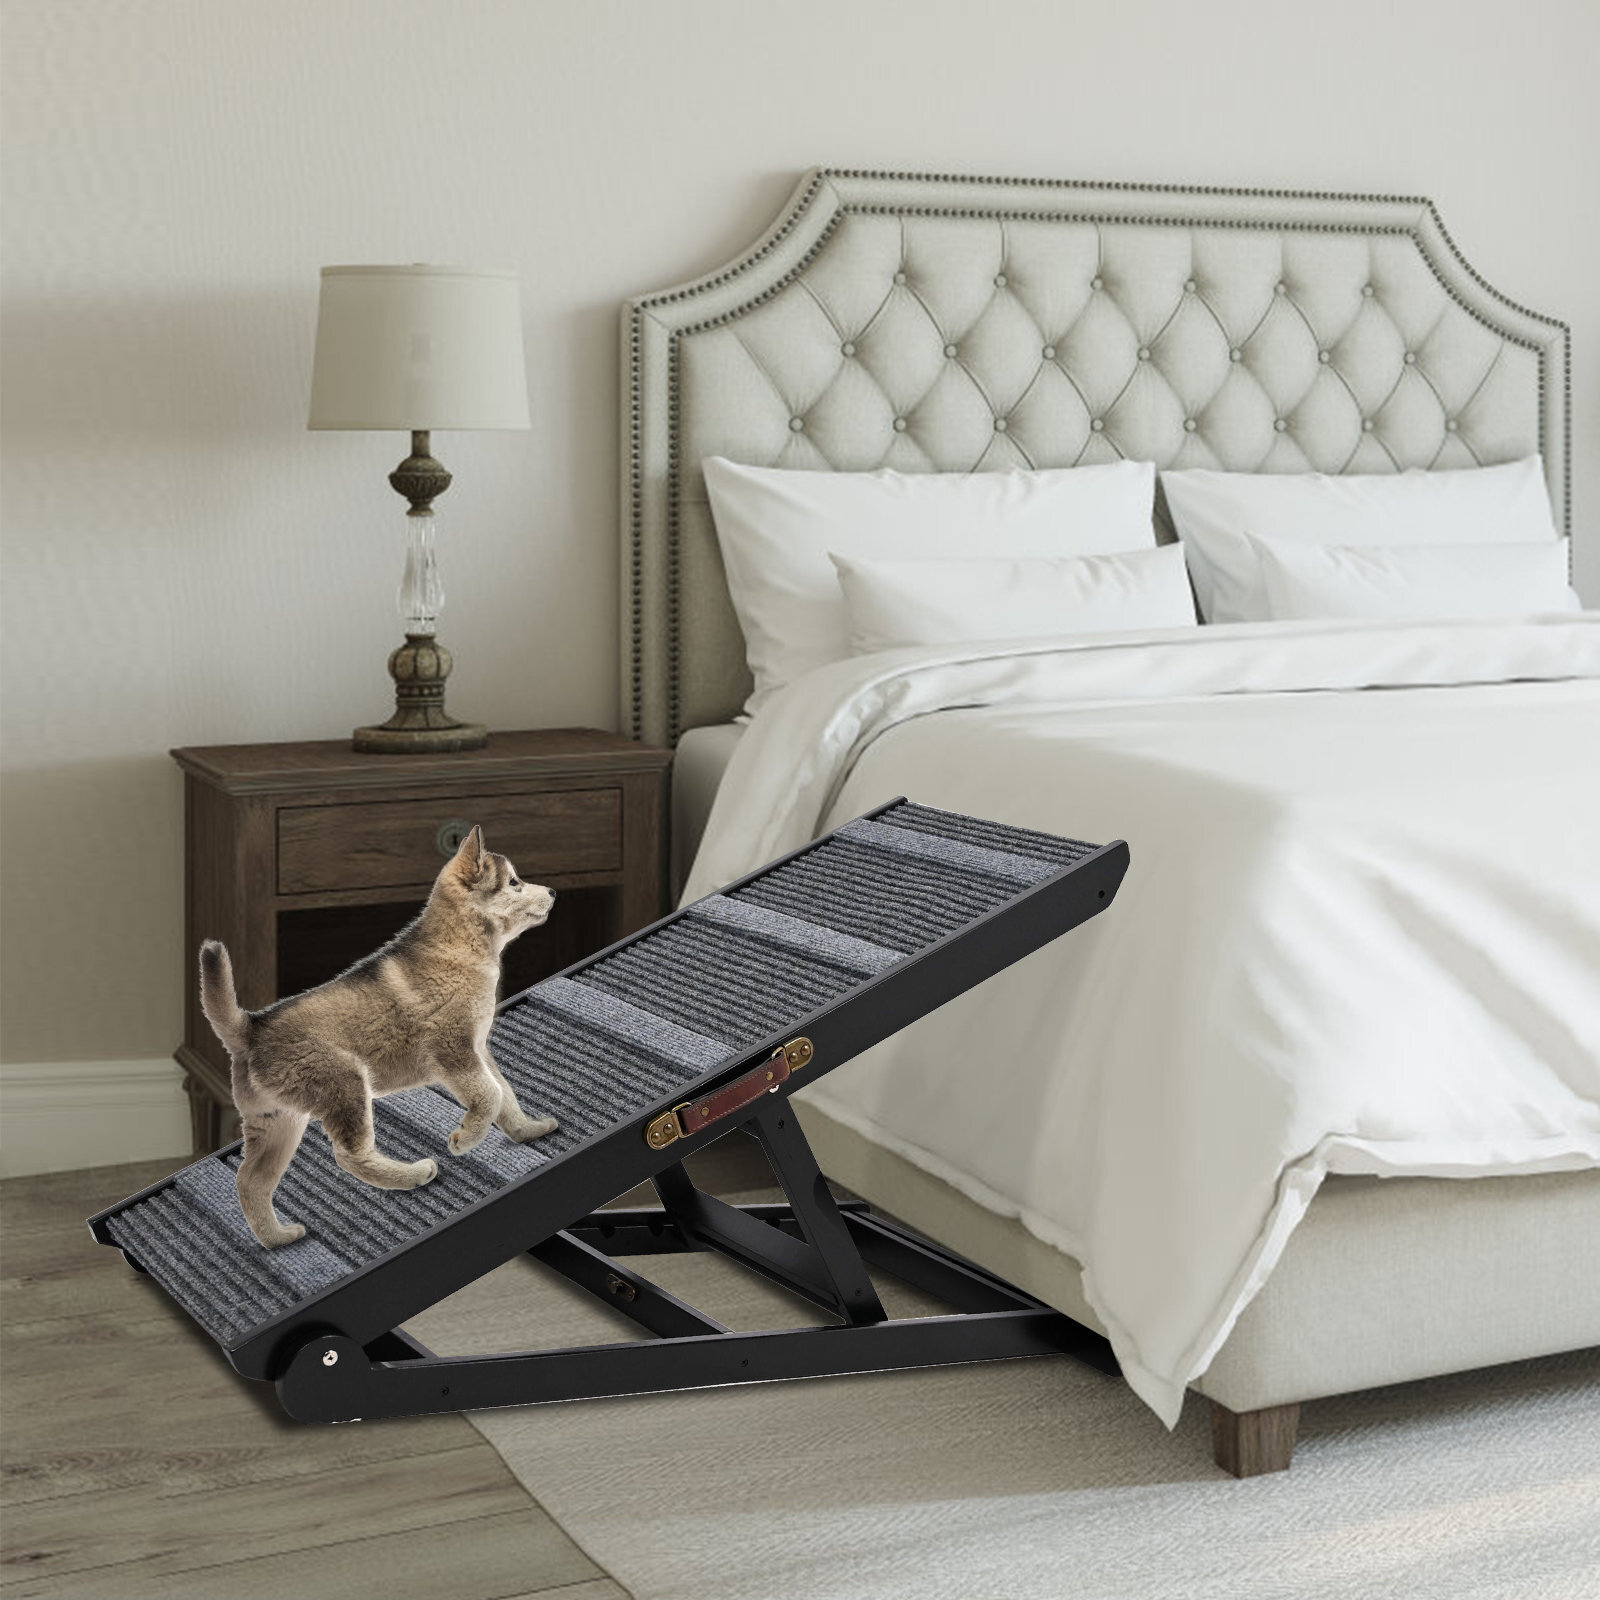 Large dog ramp for high bed